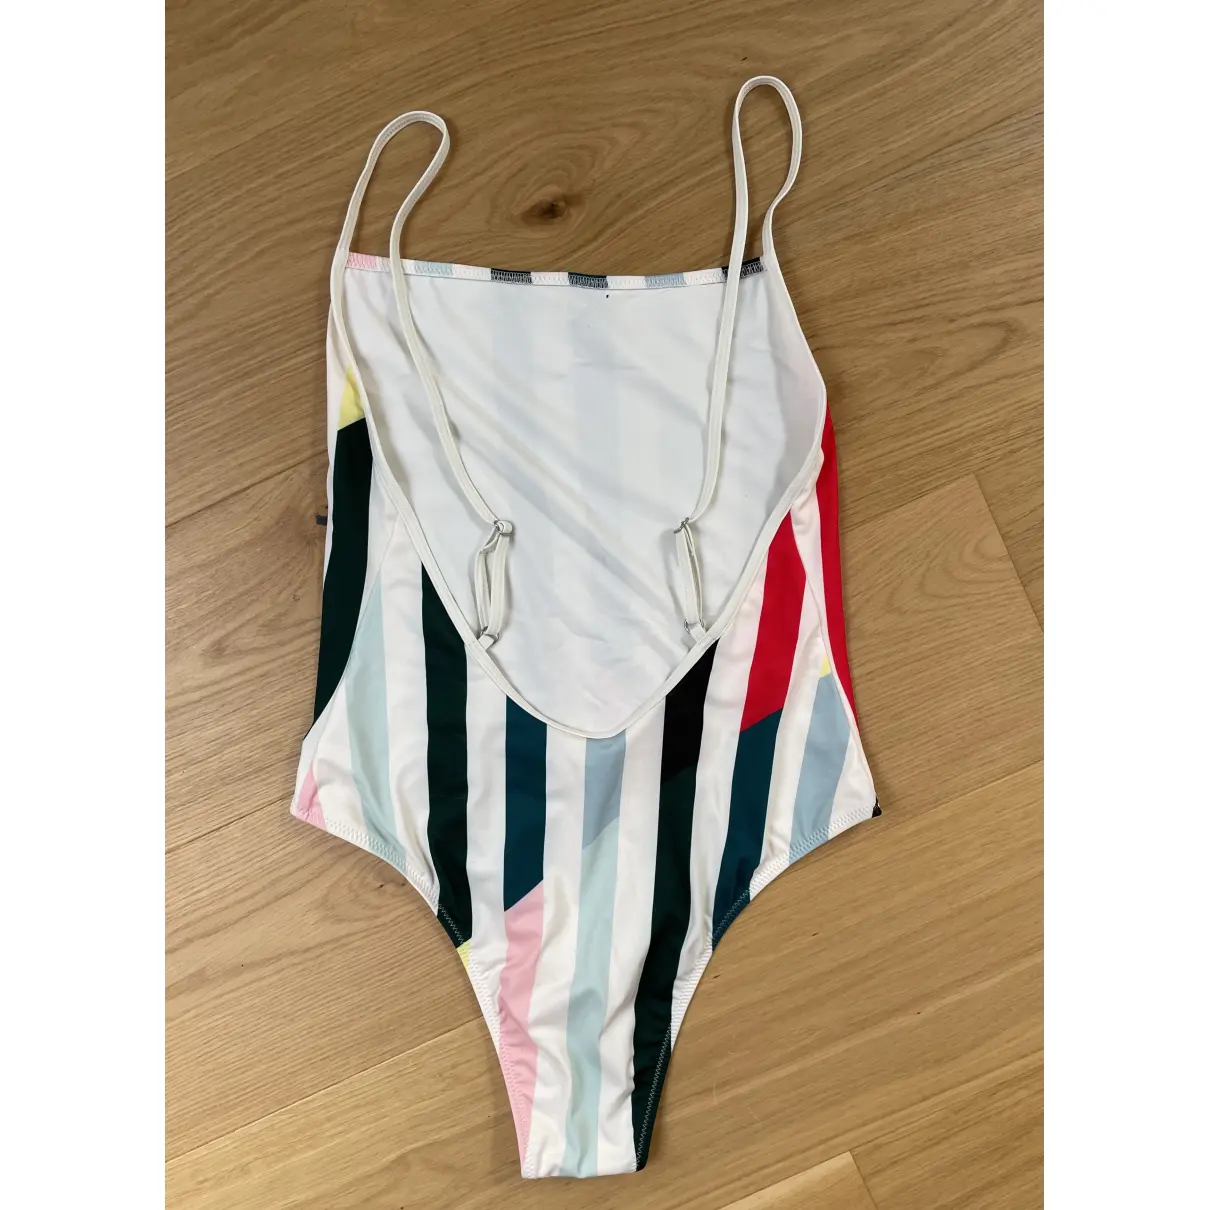 Buy Solid & Striped One-piece swimsuit online